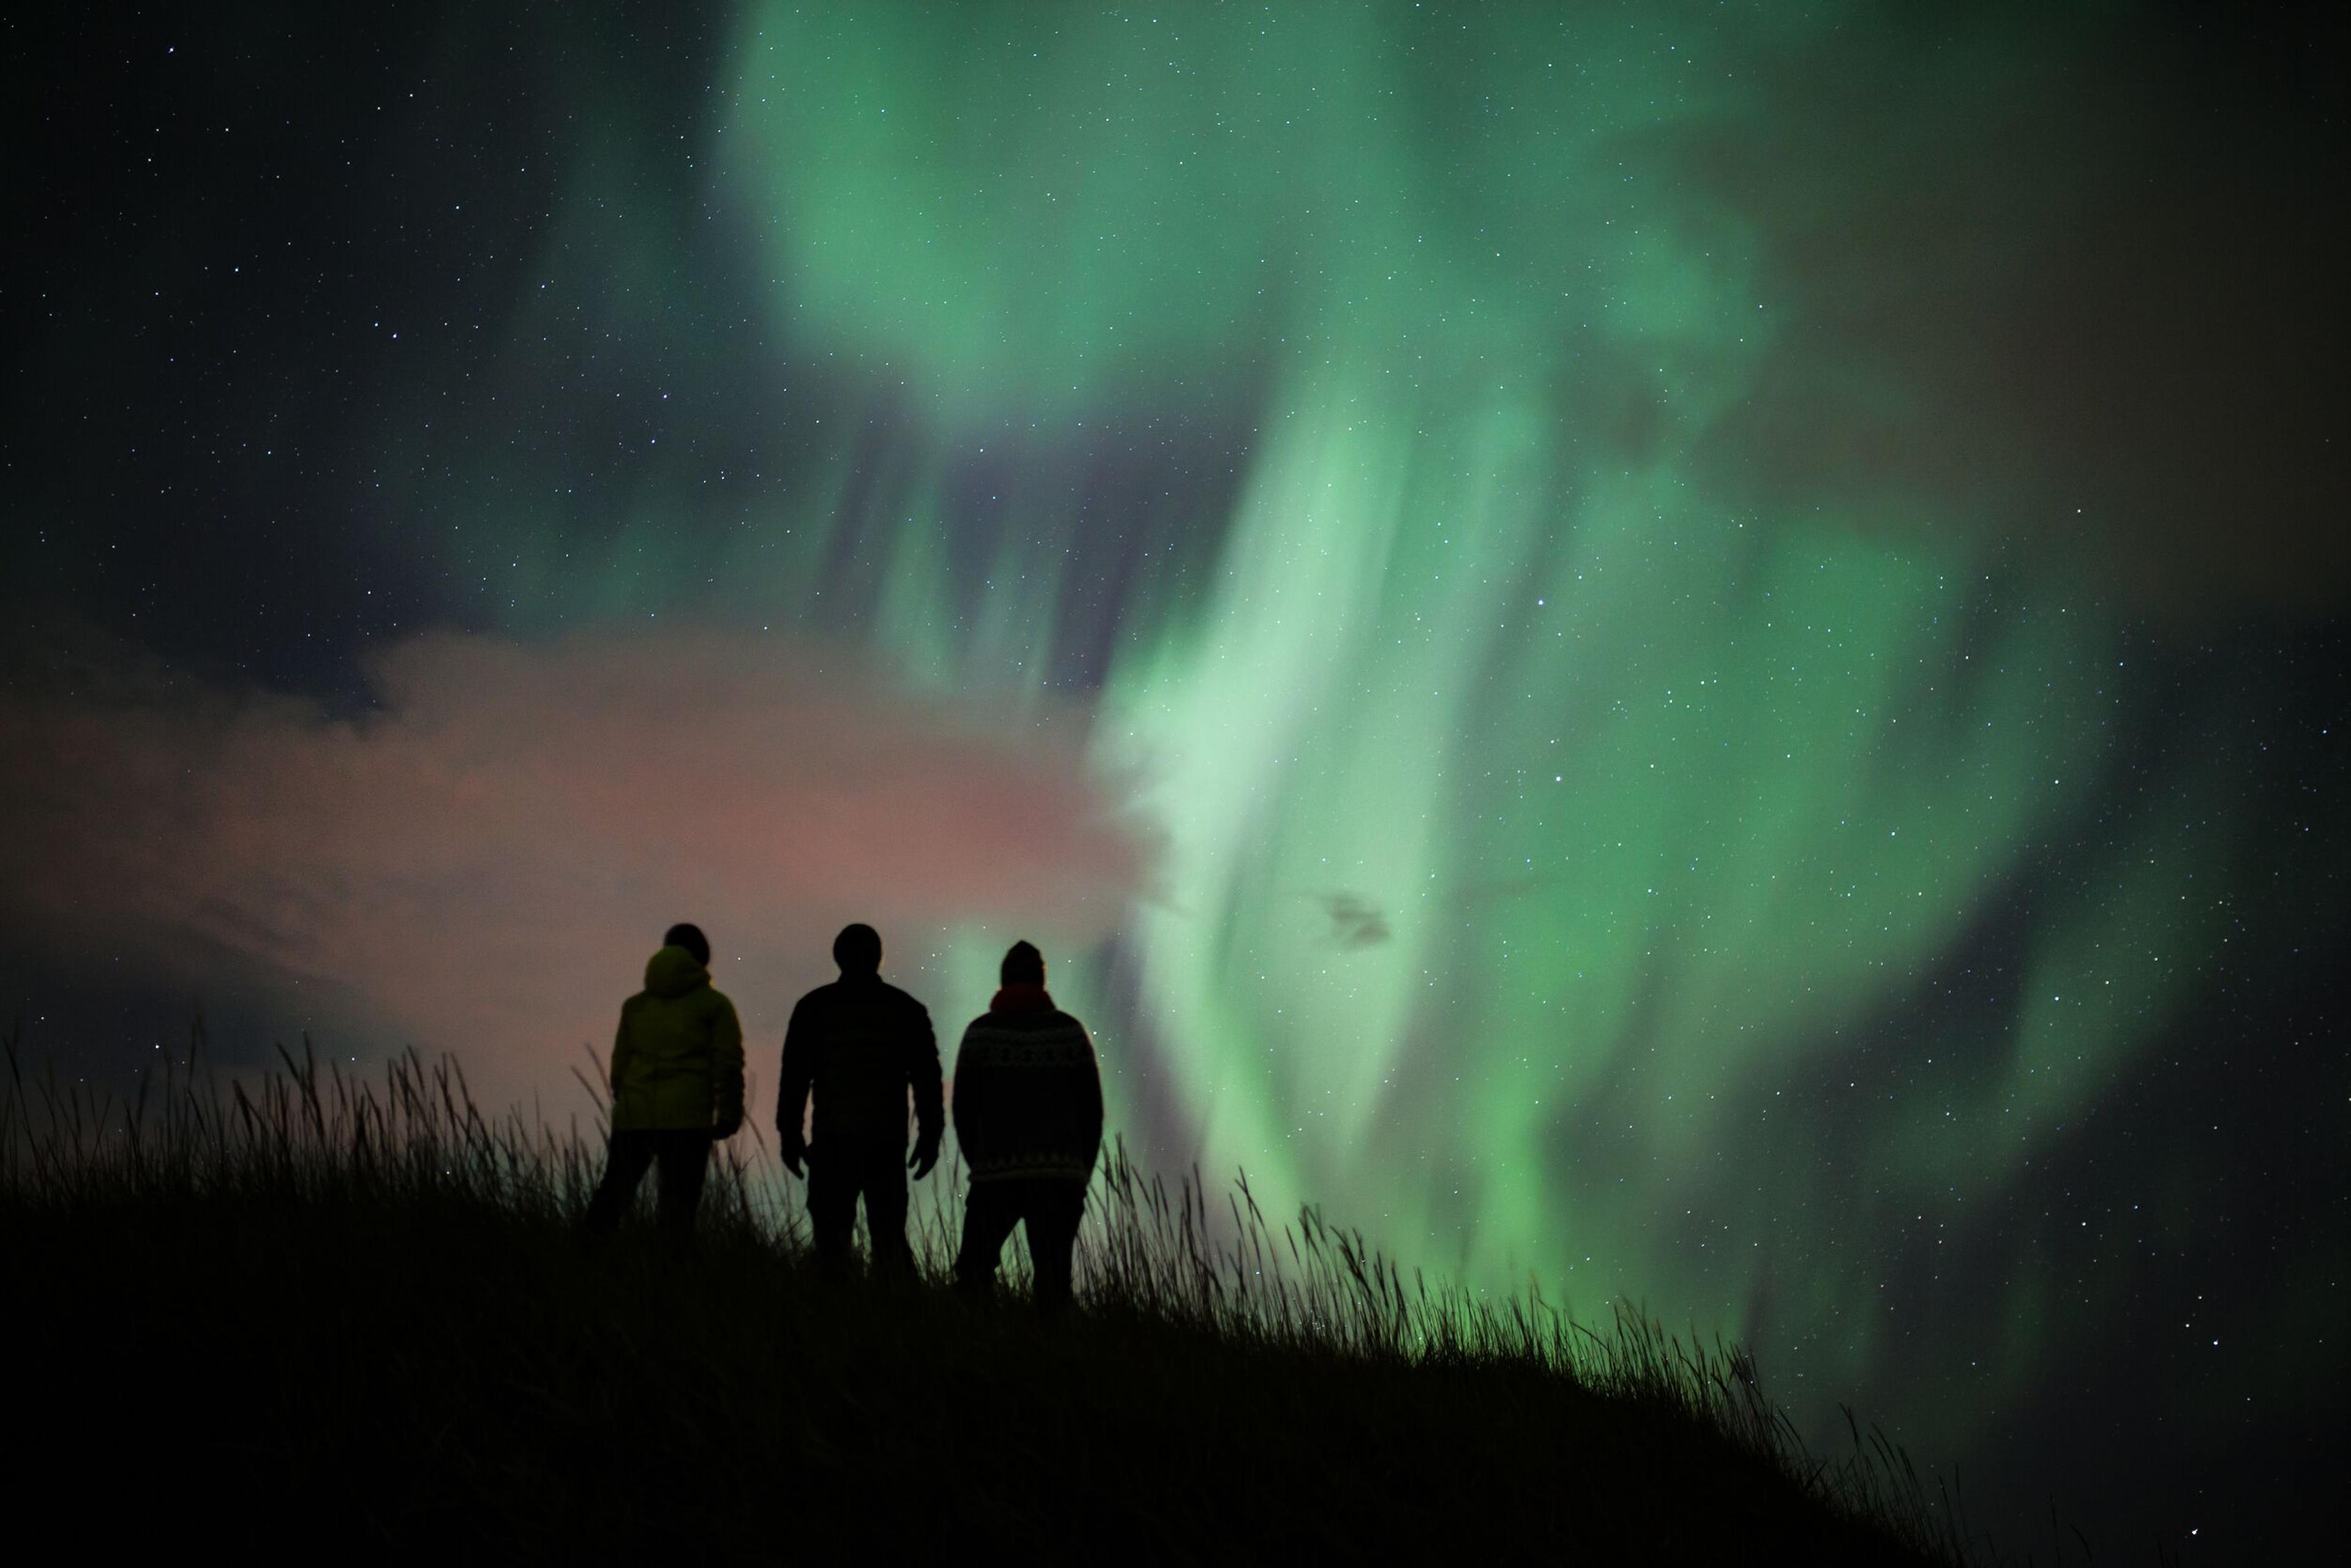 Three people standing on a grassy hill silhouetted against a night sky illuminated by the green swirls of the Northern Lights.